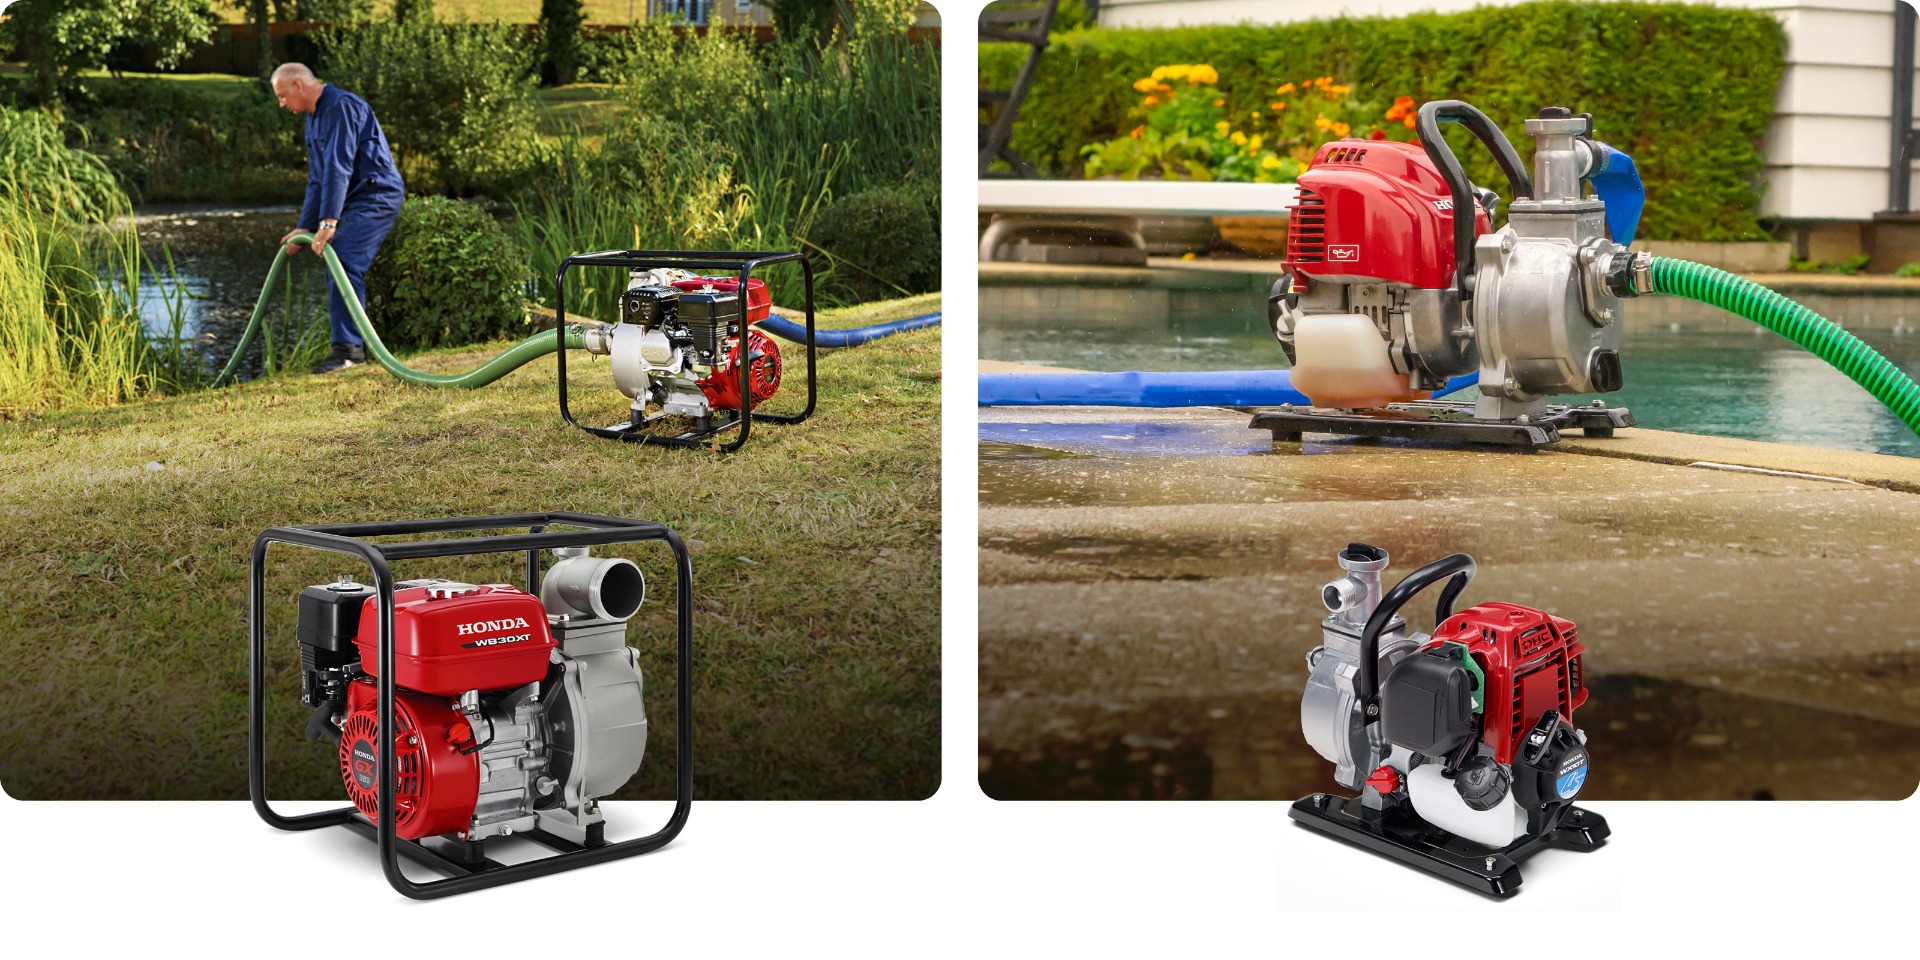 Pumps_Learn_More_Page_Contractor_or_Home_User_3200_x_1600